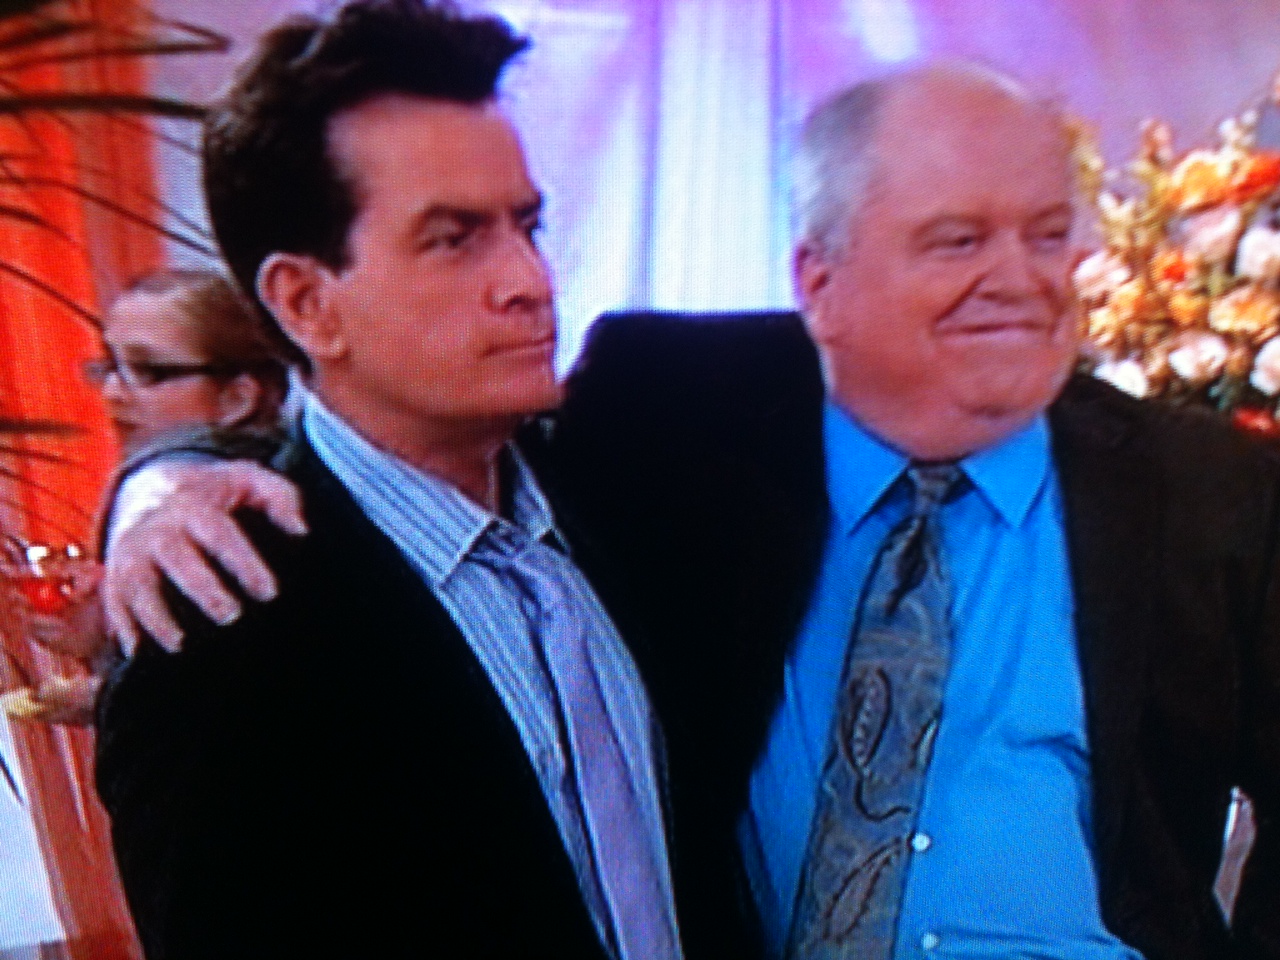 Jerry Hauck with Charlie Sheen on 'Anger Management' (2013)